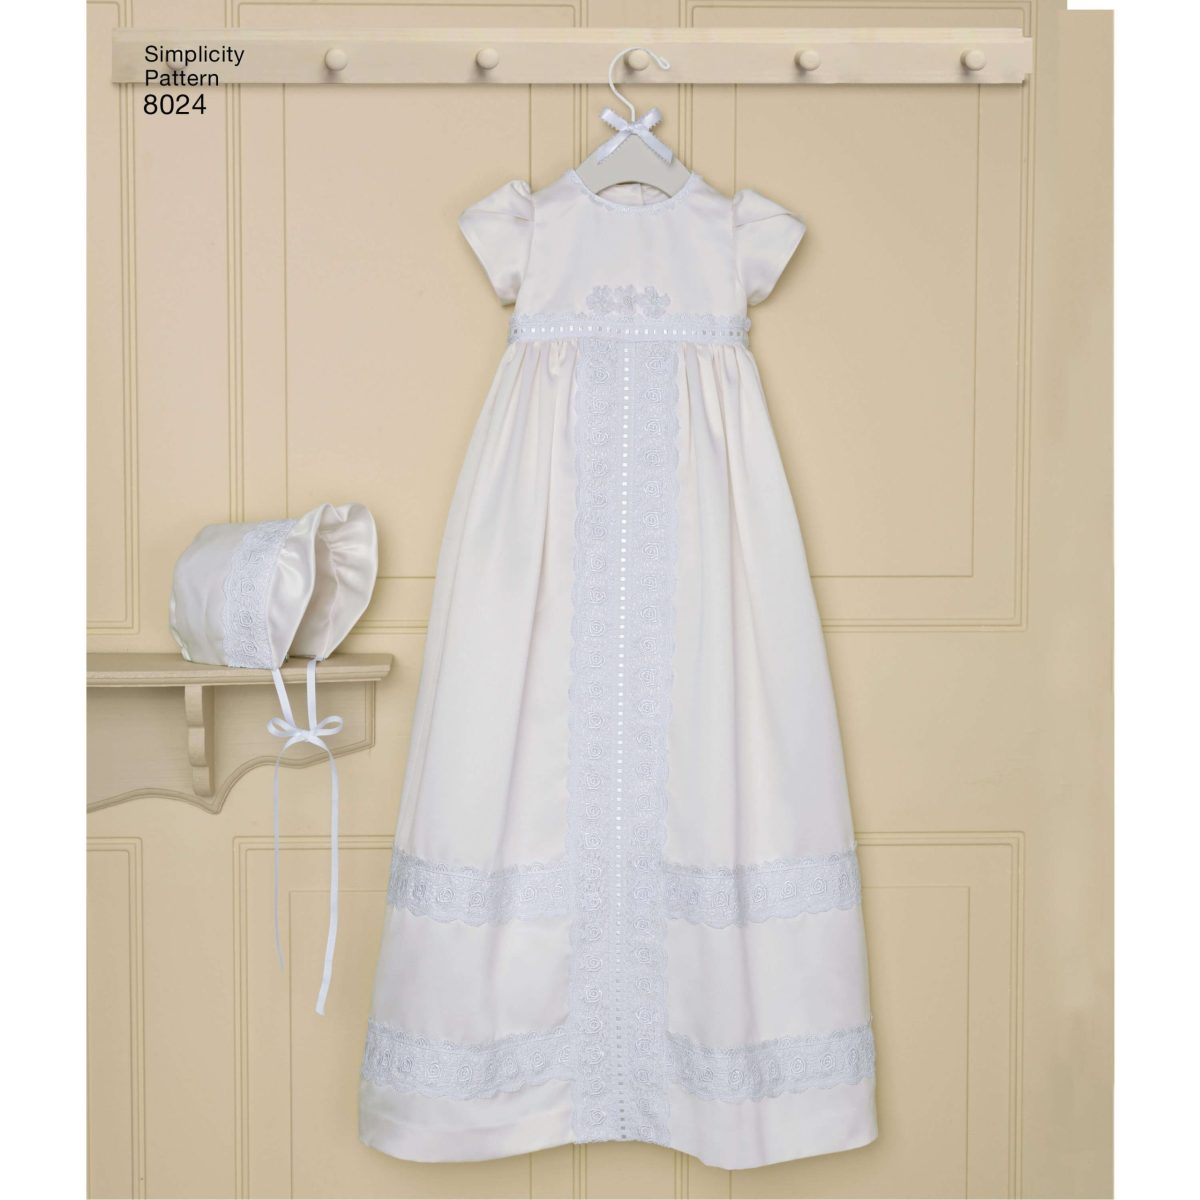 Simplicity Sewing Pattern 8024 Babies' Christening Sets with Bonnets